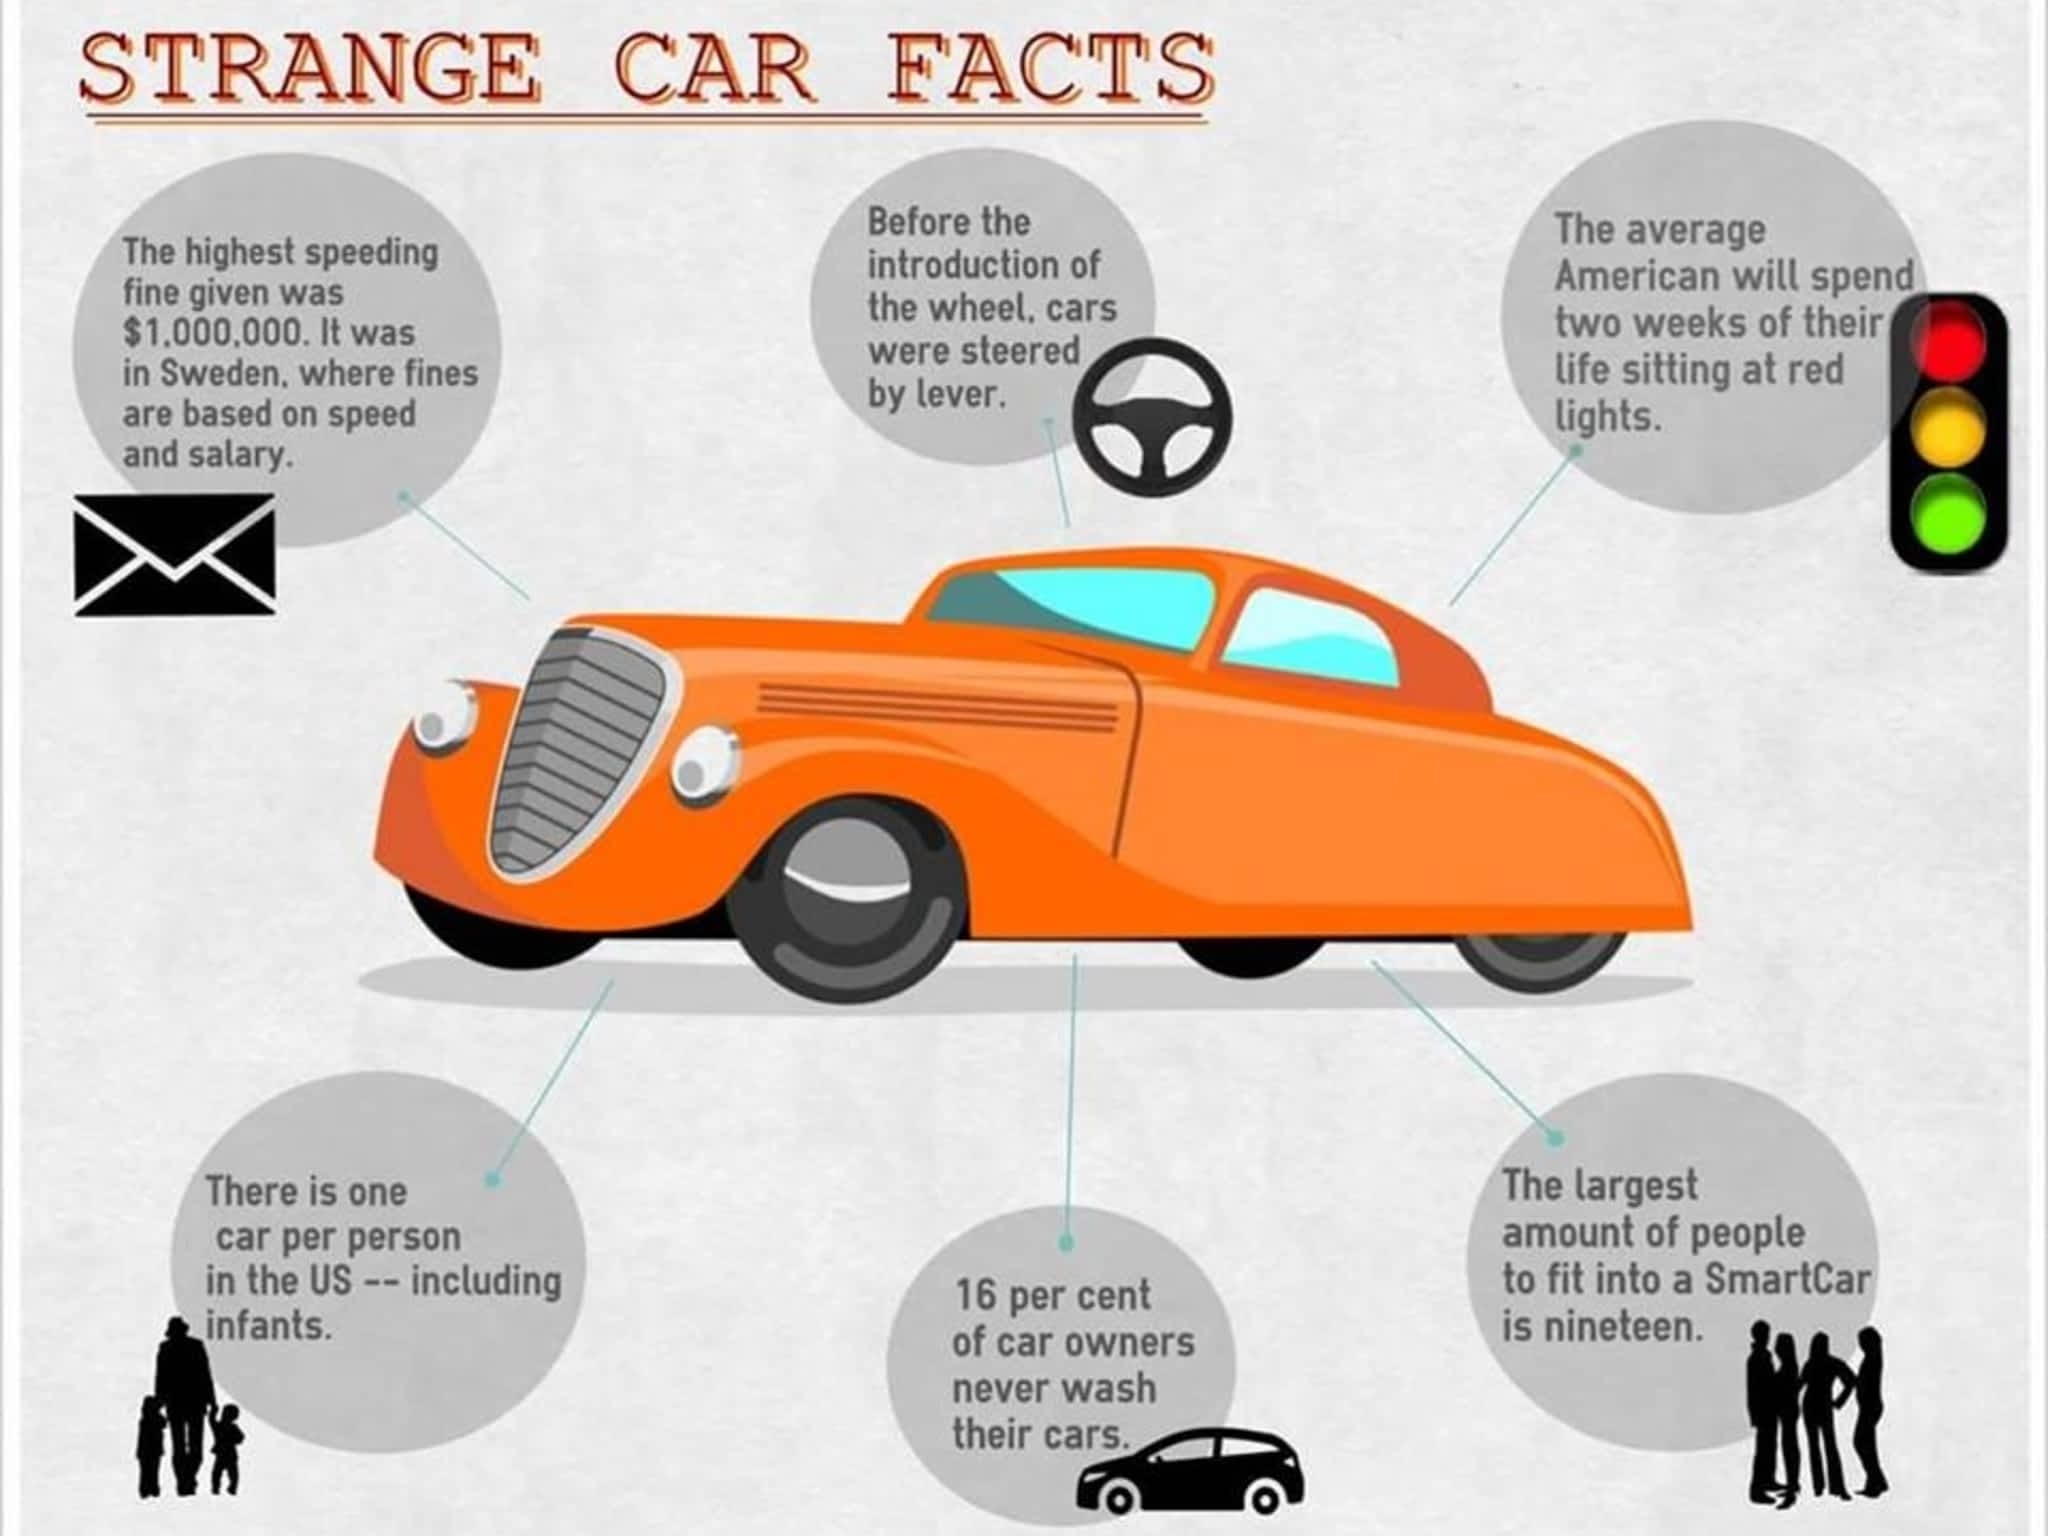 This car is theirs. About cars. Facts about cars. Smart автомобиль интересные факты. Interesting facts car.